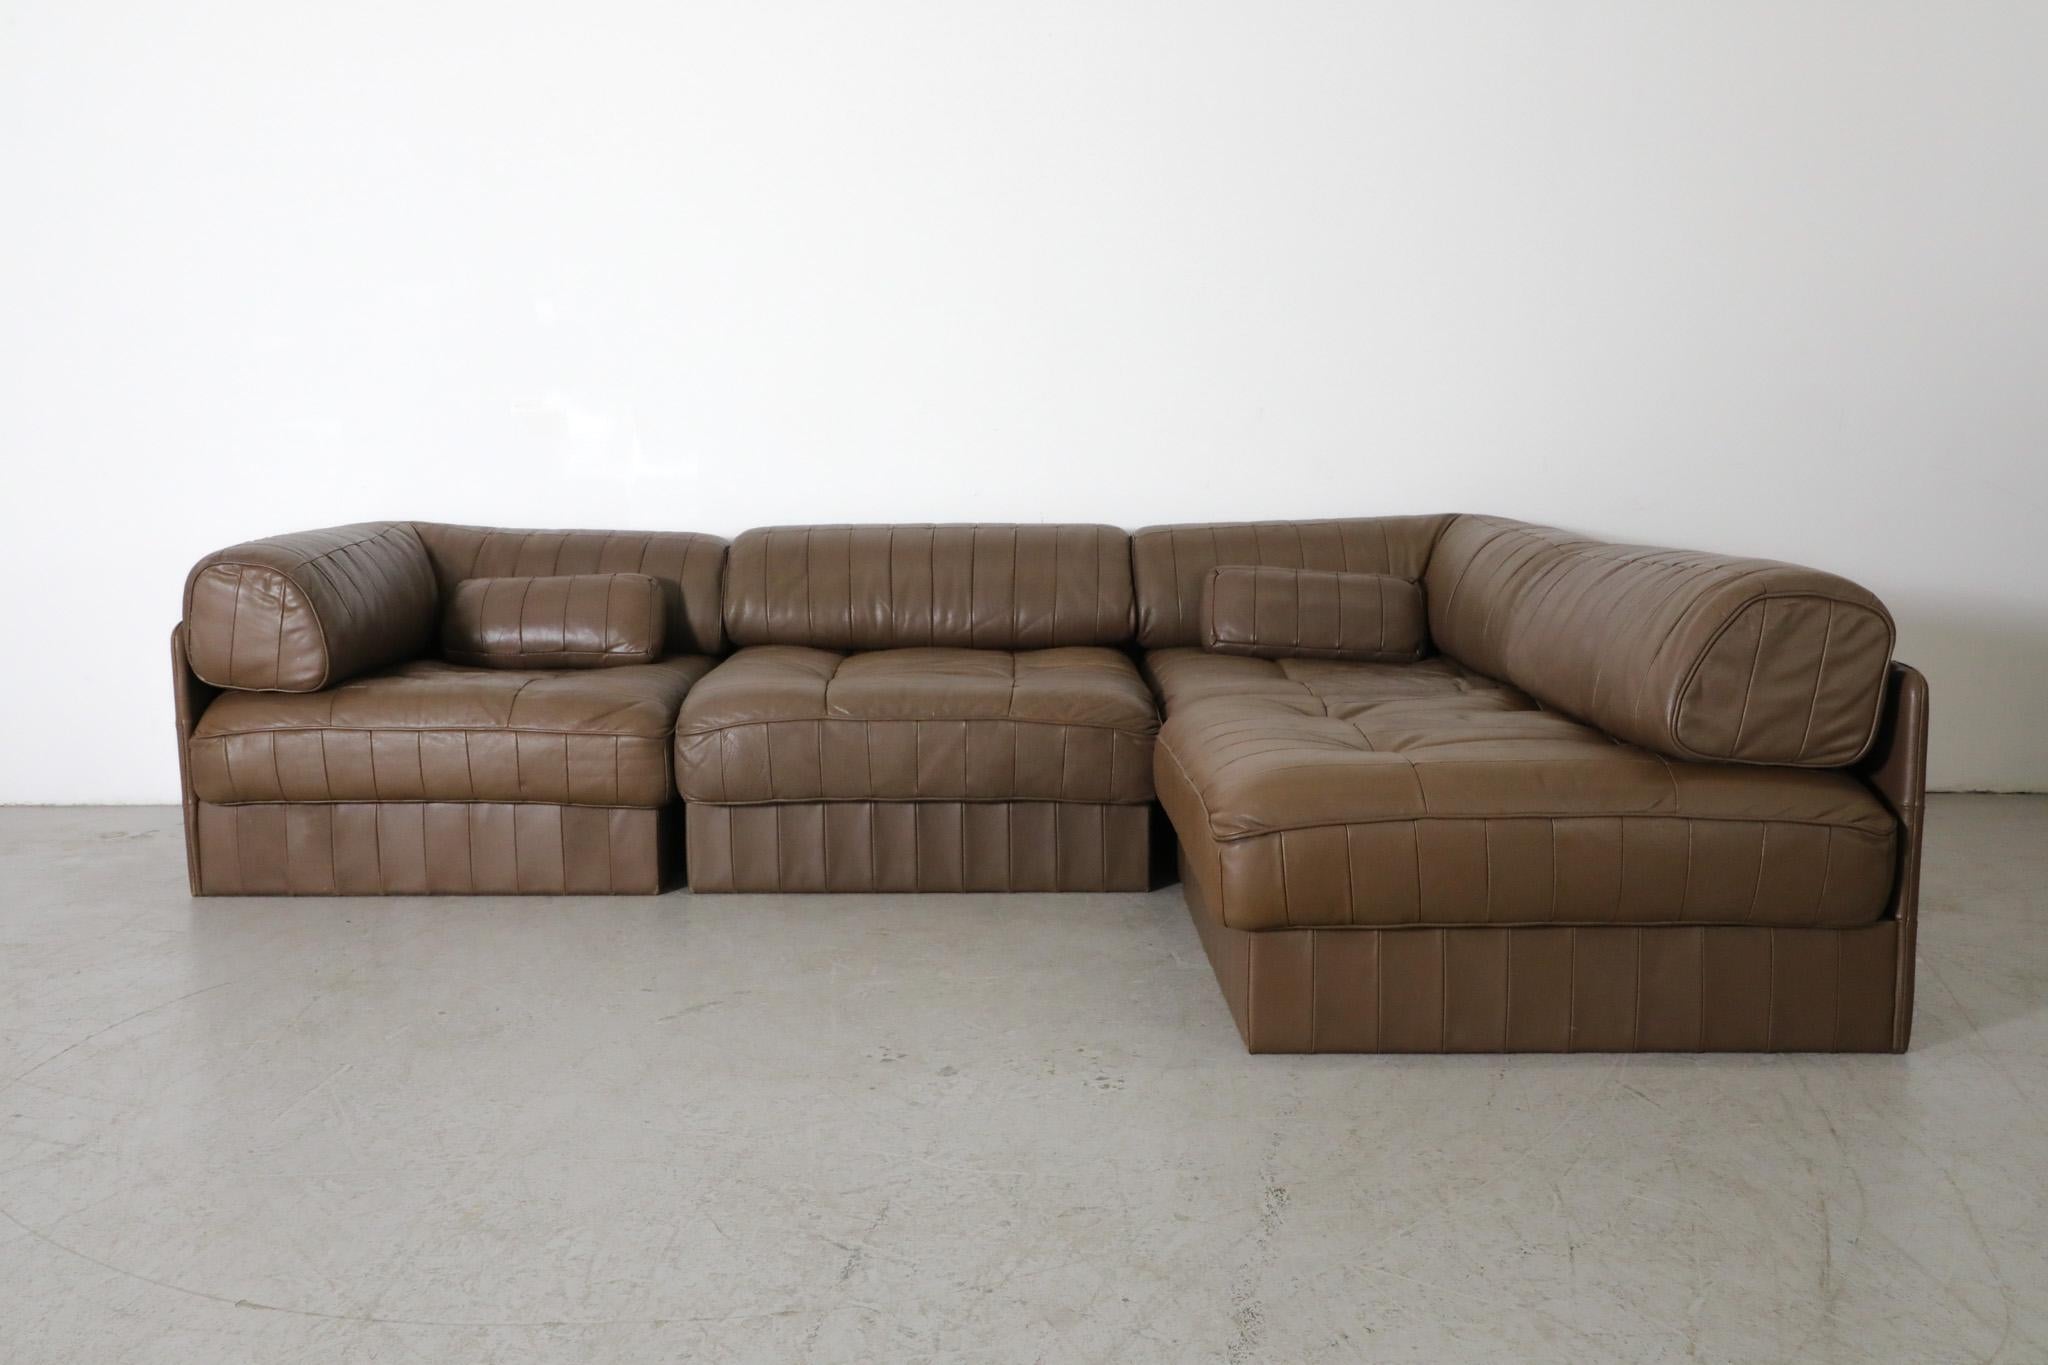 Swiss, De Sede manufactured DS88 modular patchwork sofa in chocolate brown leather. Consists of two corner sections and two middle sections and can be arranged in a straight line or and L shape. Sofa comes with two small throw pillows.  De Sede has